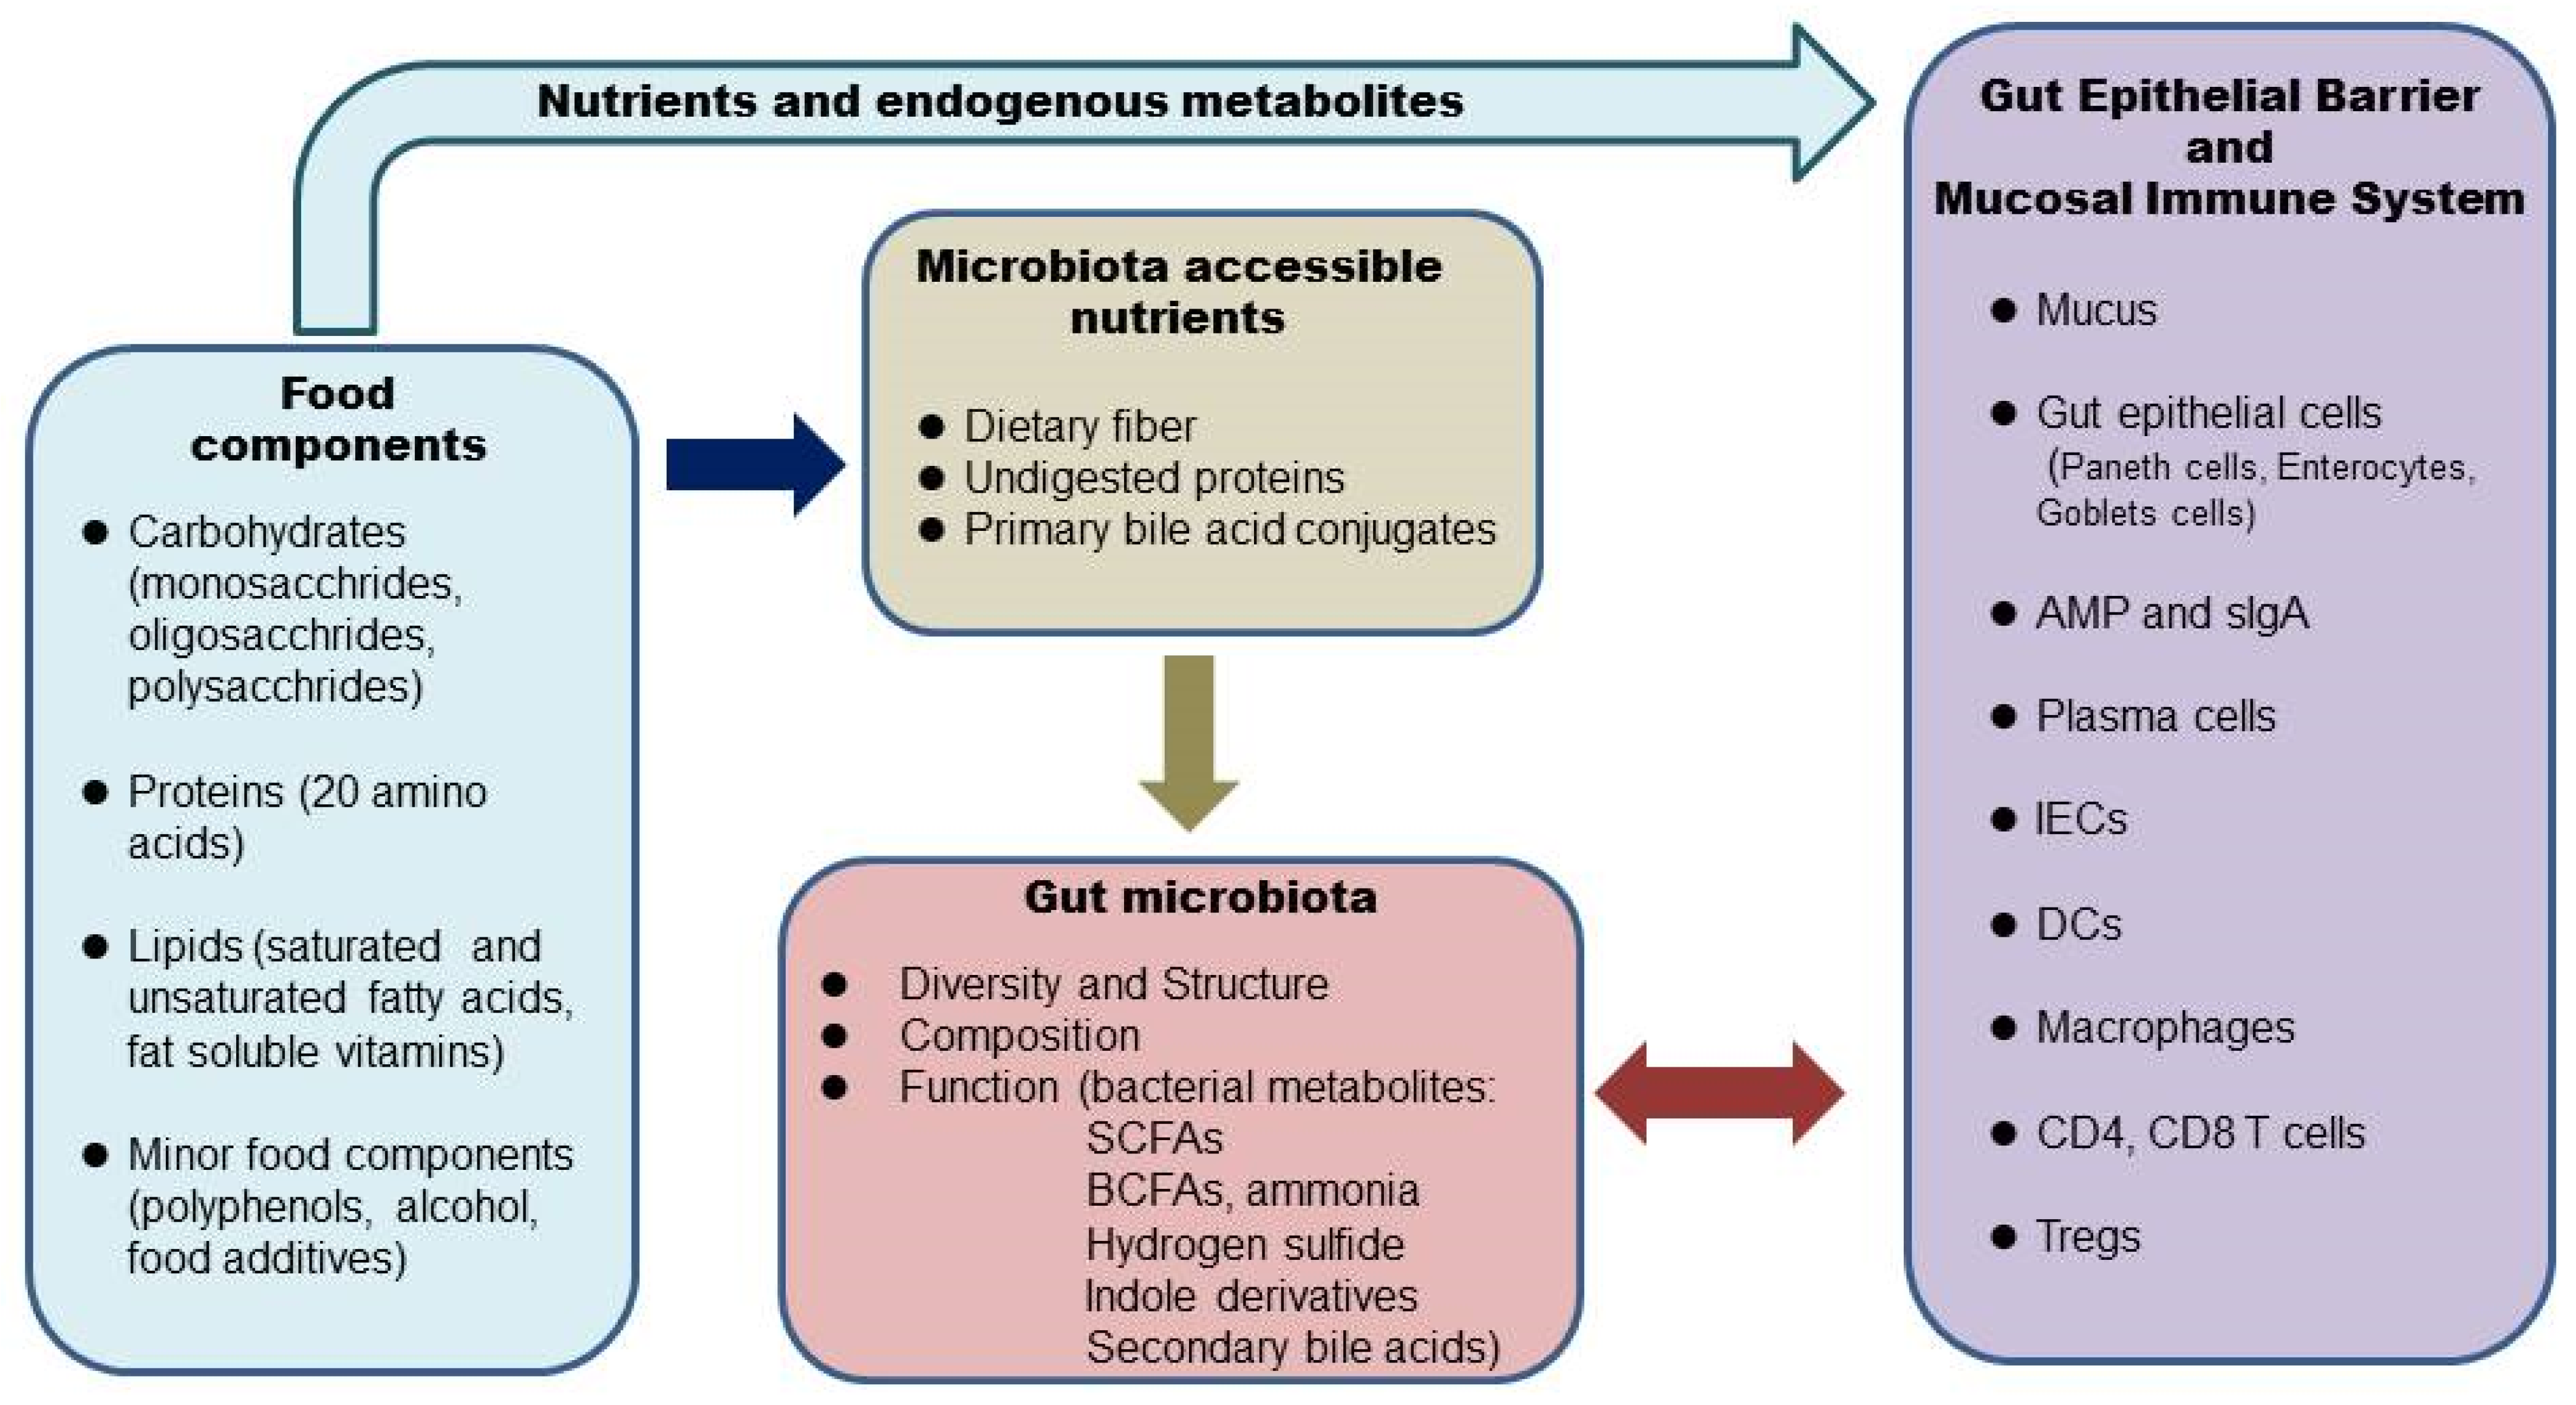 Influence of Foods and Nutrition on the gut microbiome